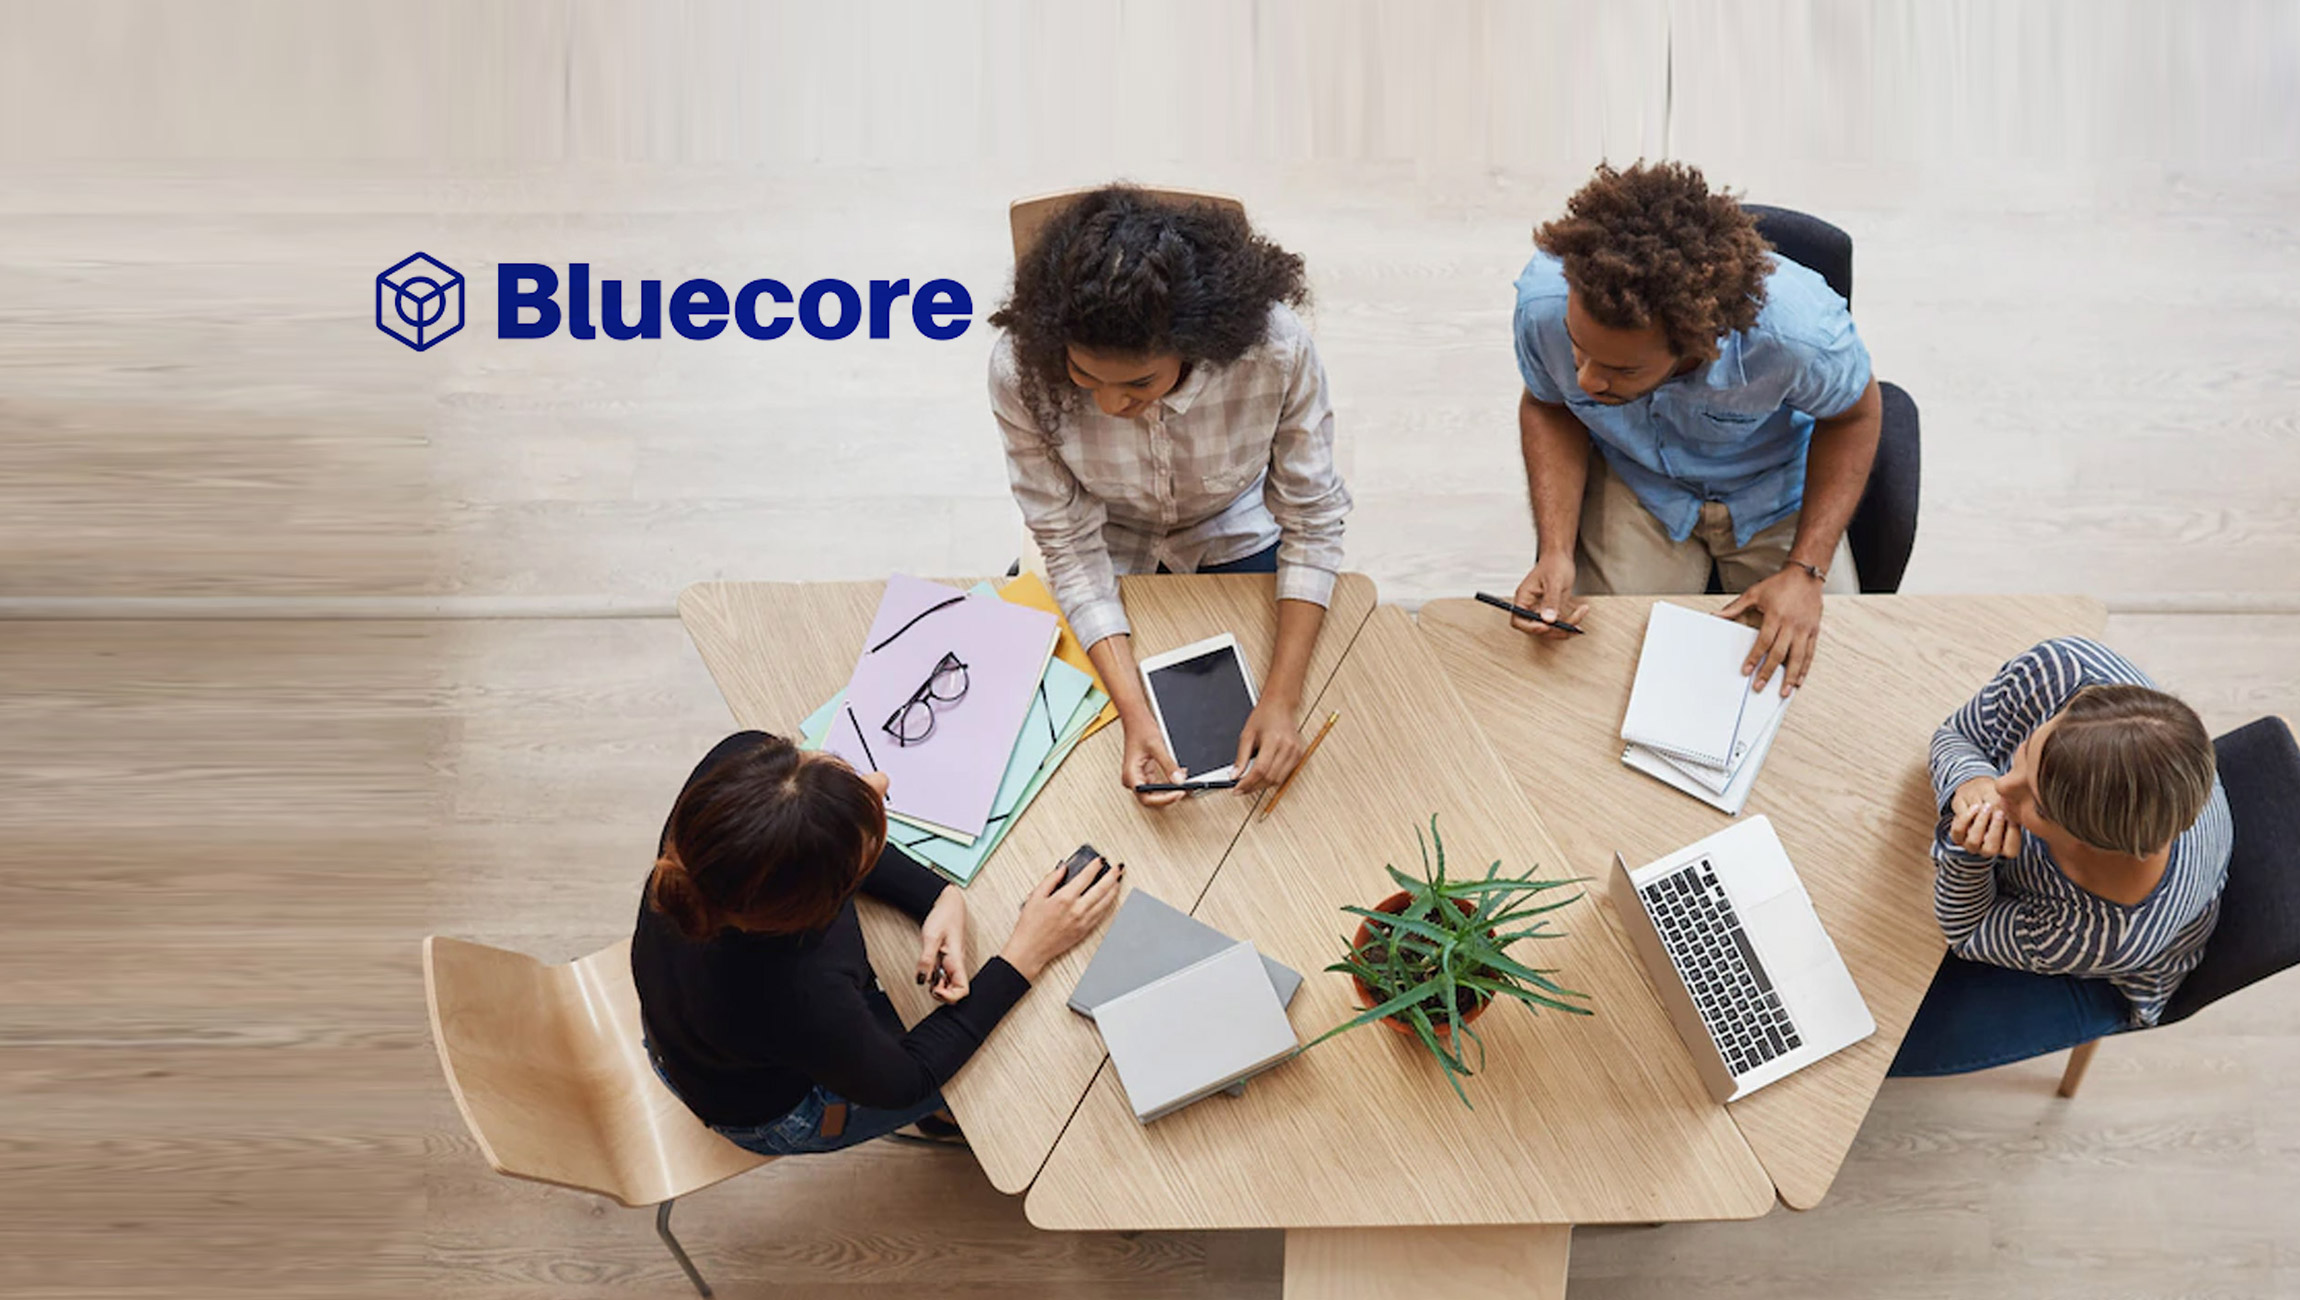 Bluecore Drives 3X Ecommerce Growth for Retailers, According to Total Economic Impact™ Study